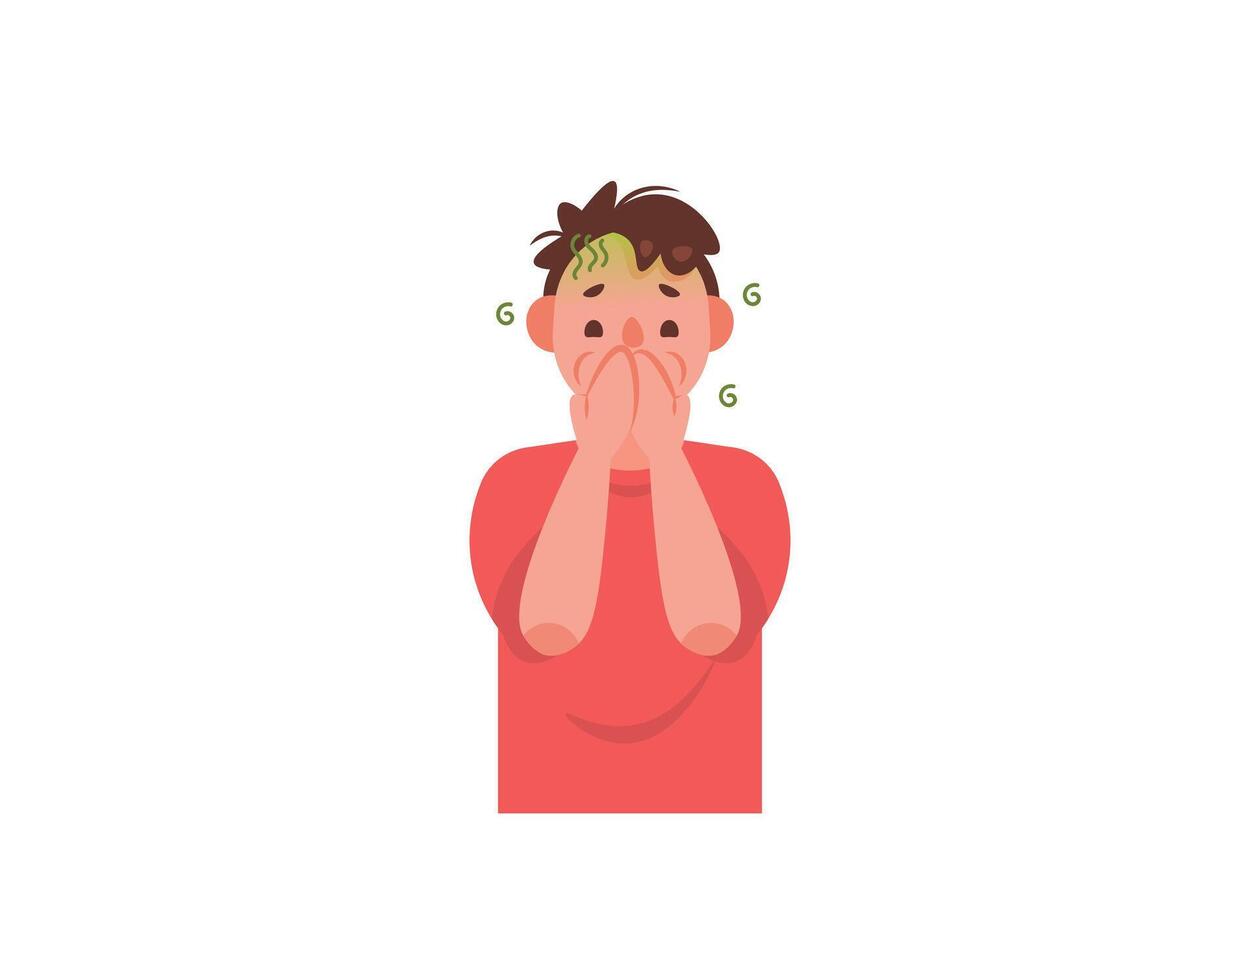 a man covers his mouth because he wants to vomit. keep from vomiting. dizziness, nausea and wanting to vomit. sick, not feeling well. diseases and health problems. character illustration design vector